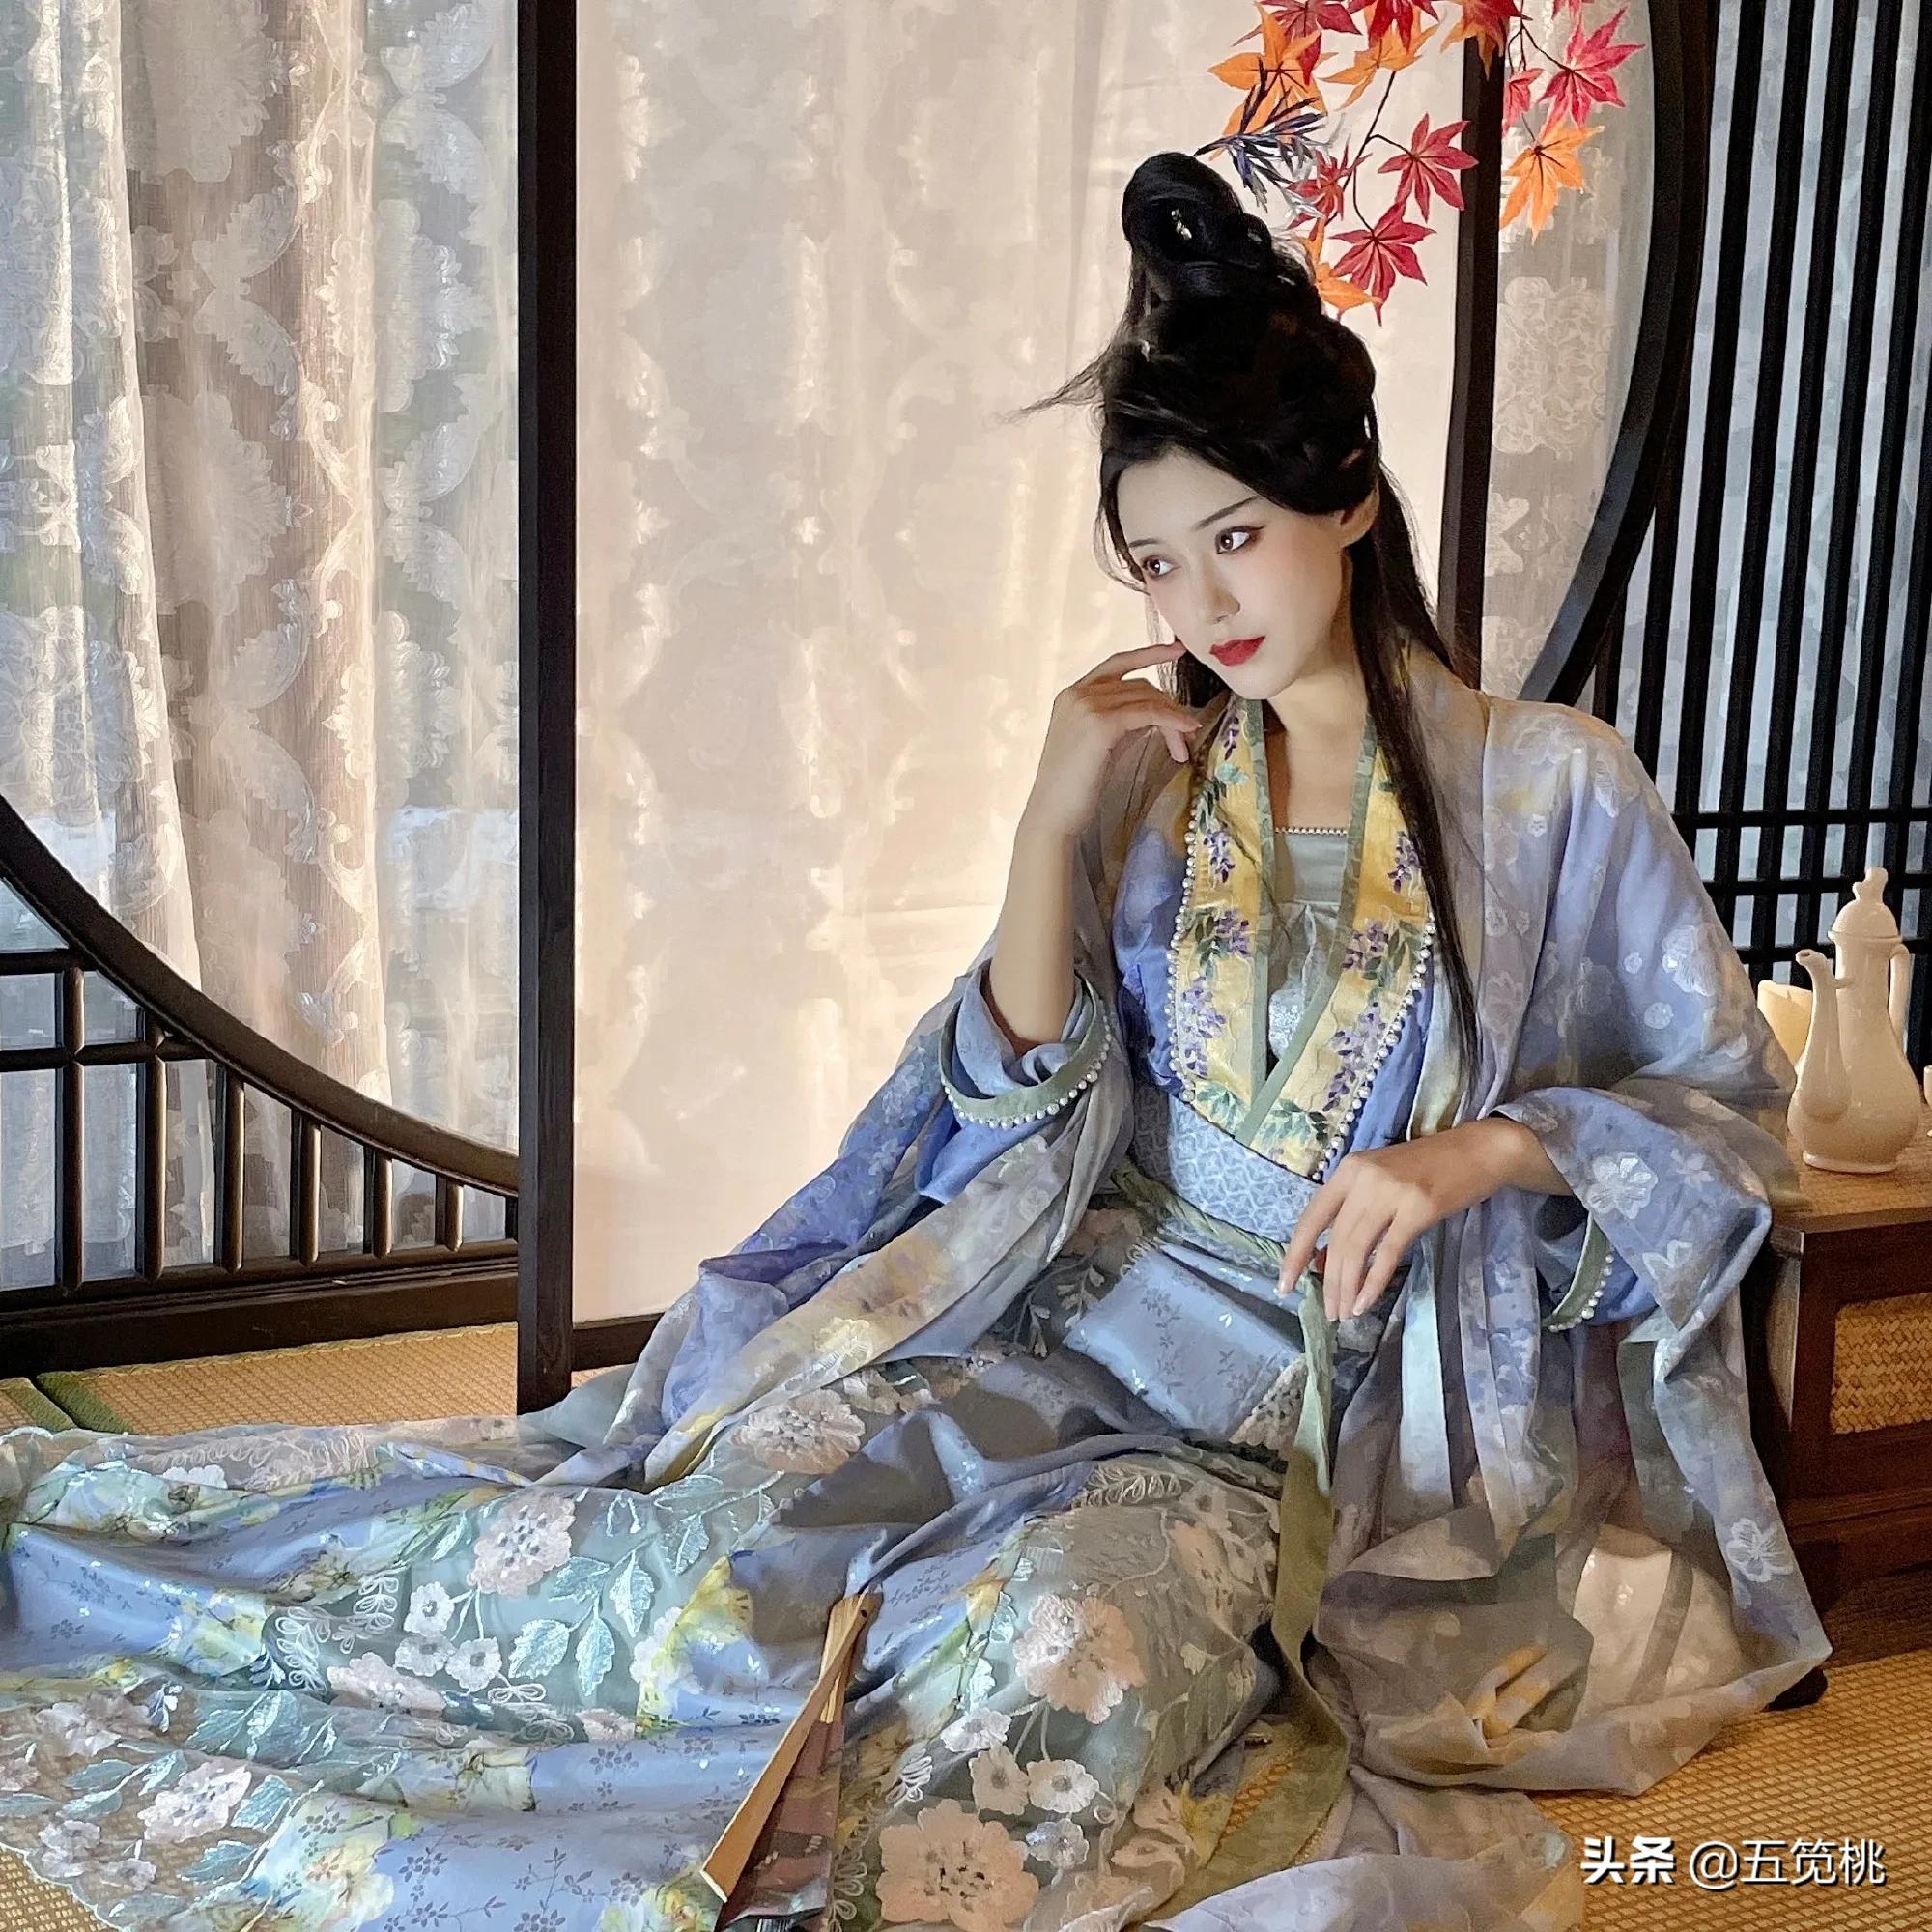 my hanfu favorites — Do you know where/what red or pink eye makeup